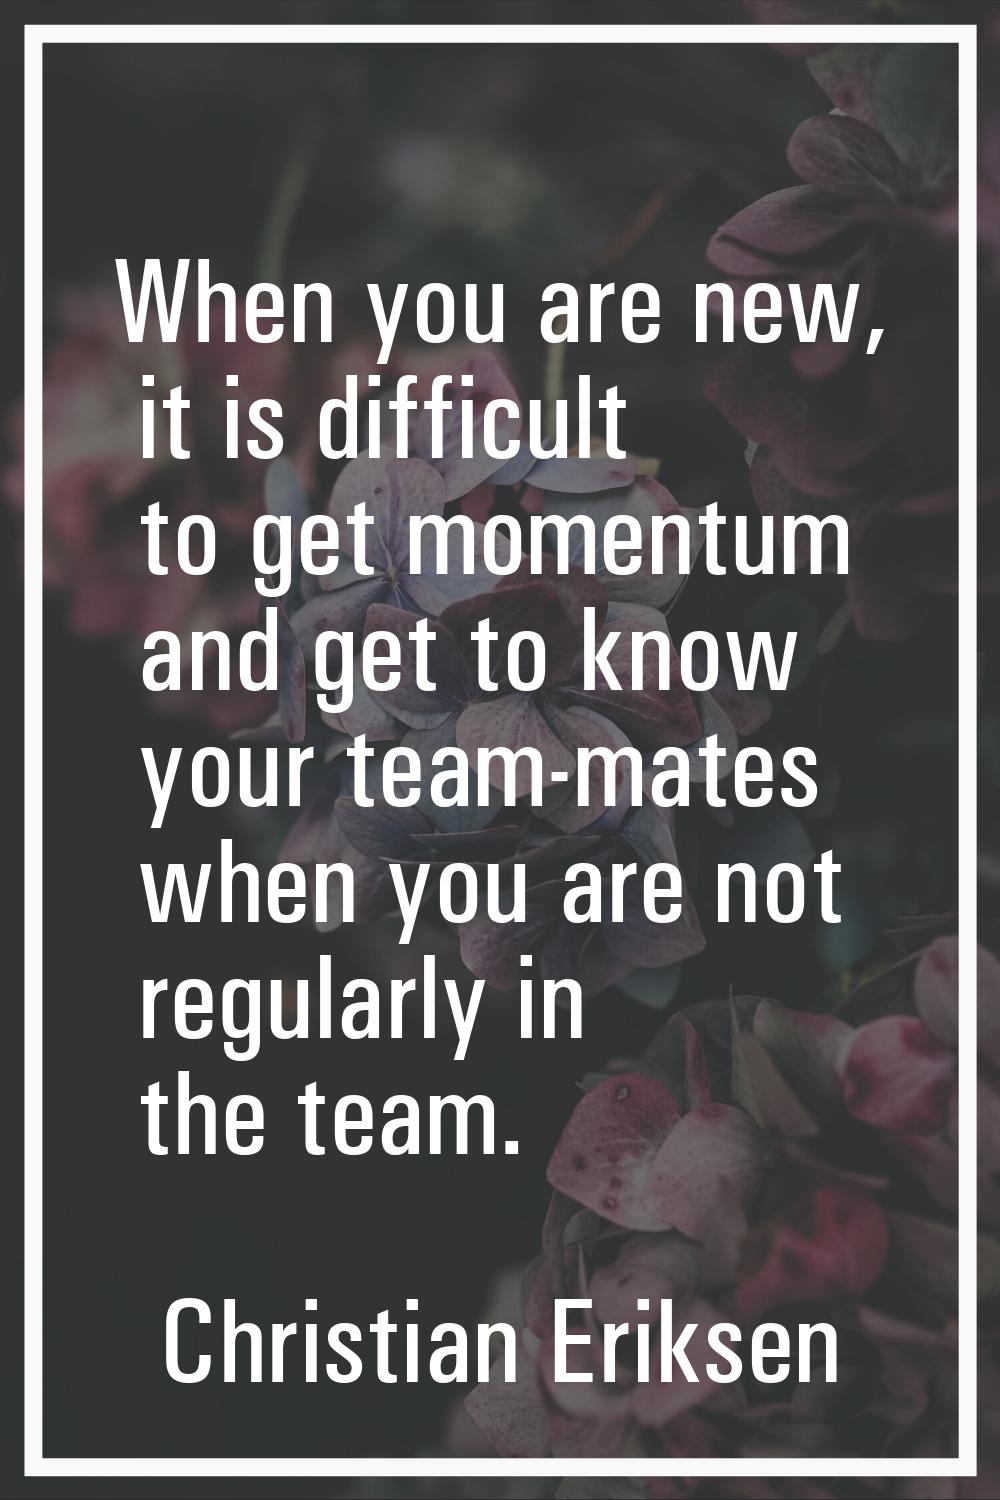 When you are new, it is difficult to get momentum and get to know your team-mates when you are not 